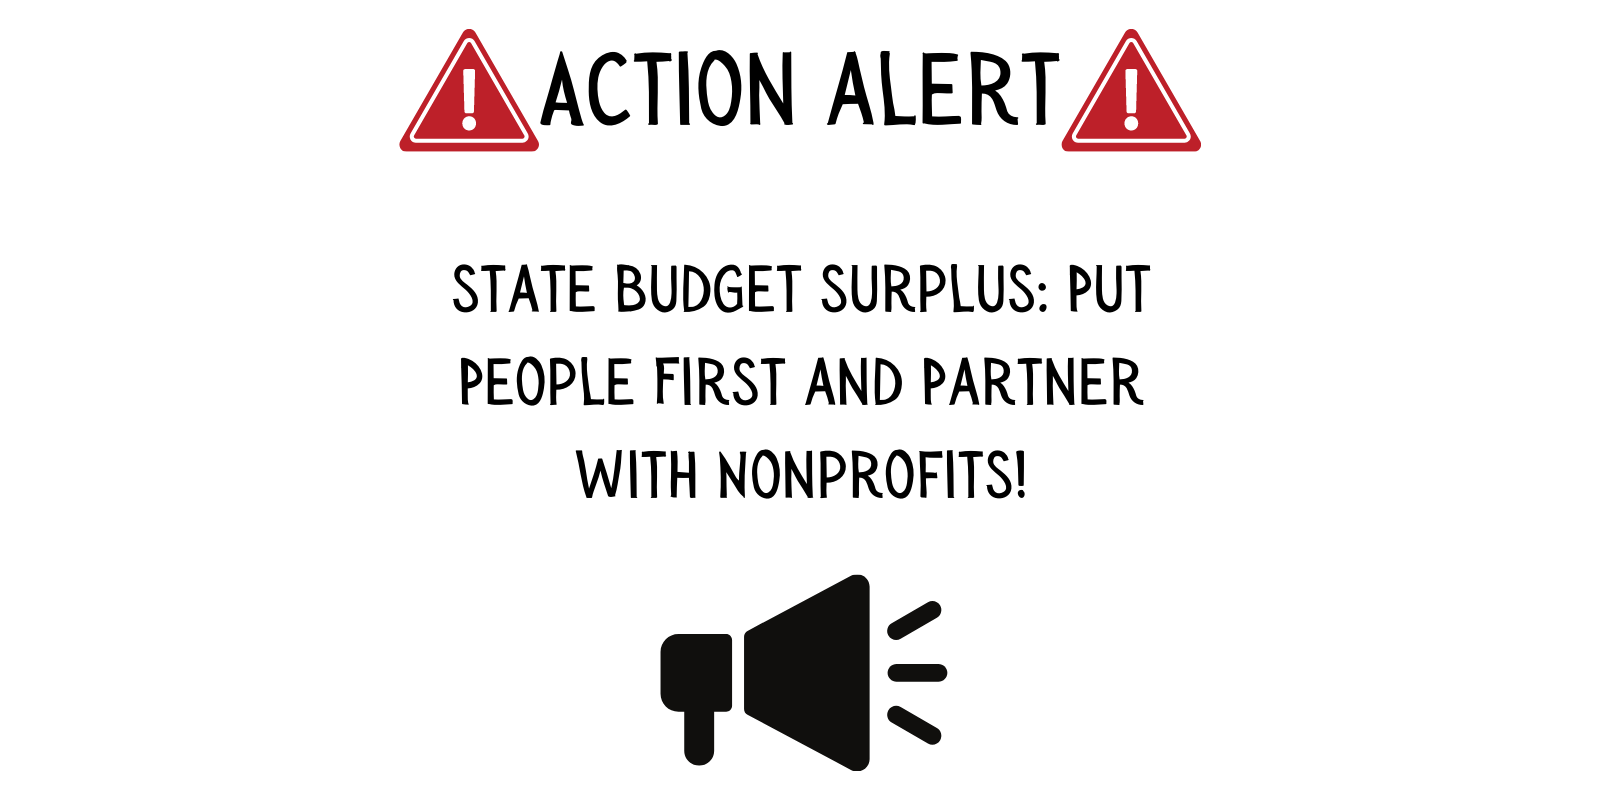 Action alert, state budget surplus: put people first and partner with nonprofits!